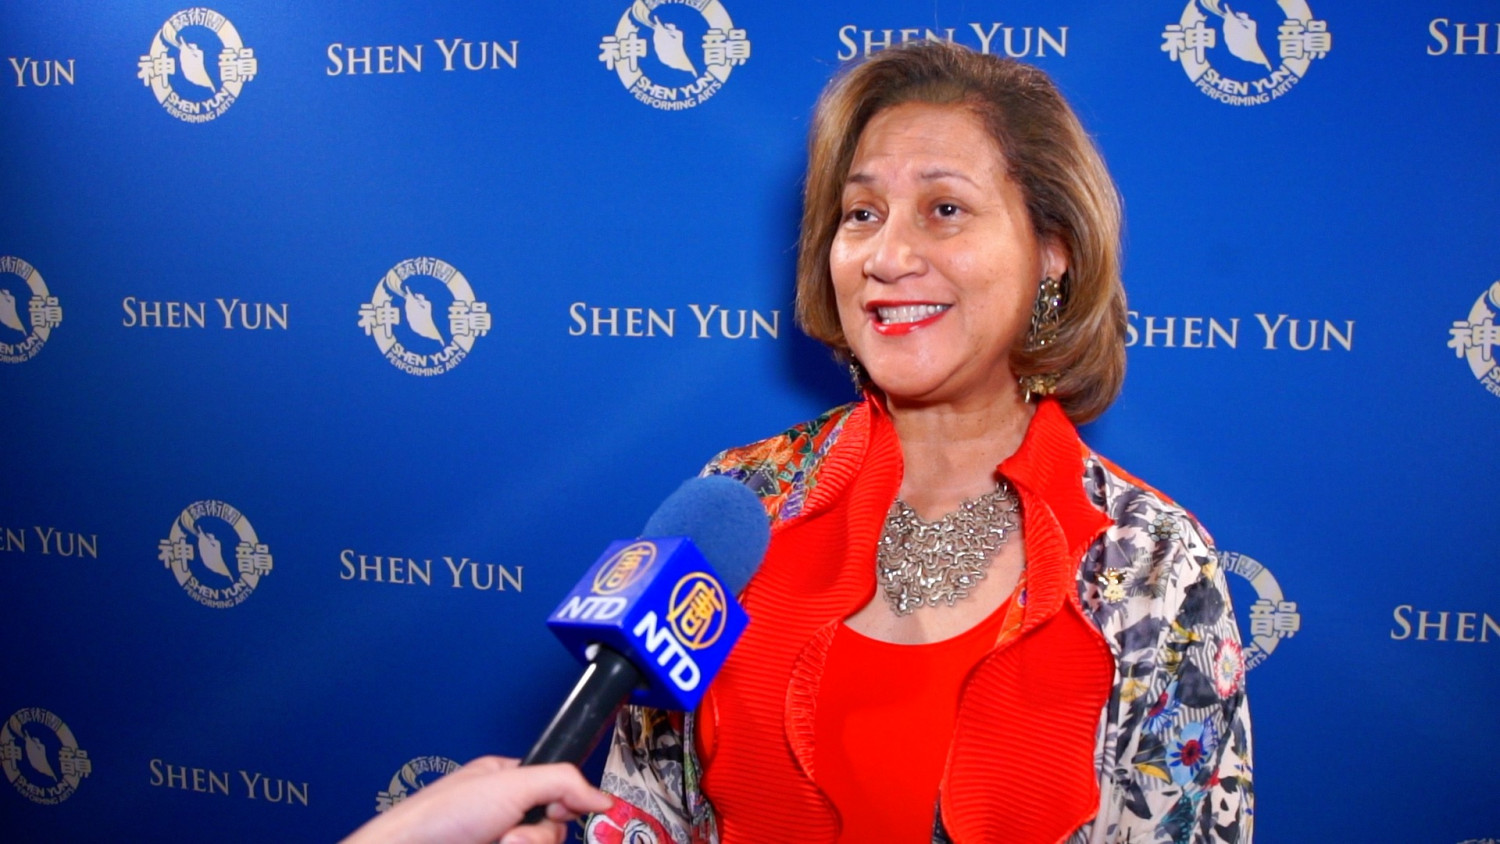 CEO Returns to See Shen Yun for the Fourth Time